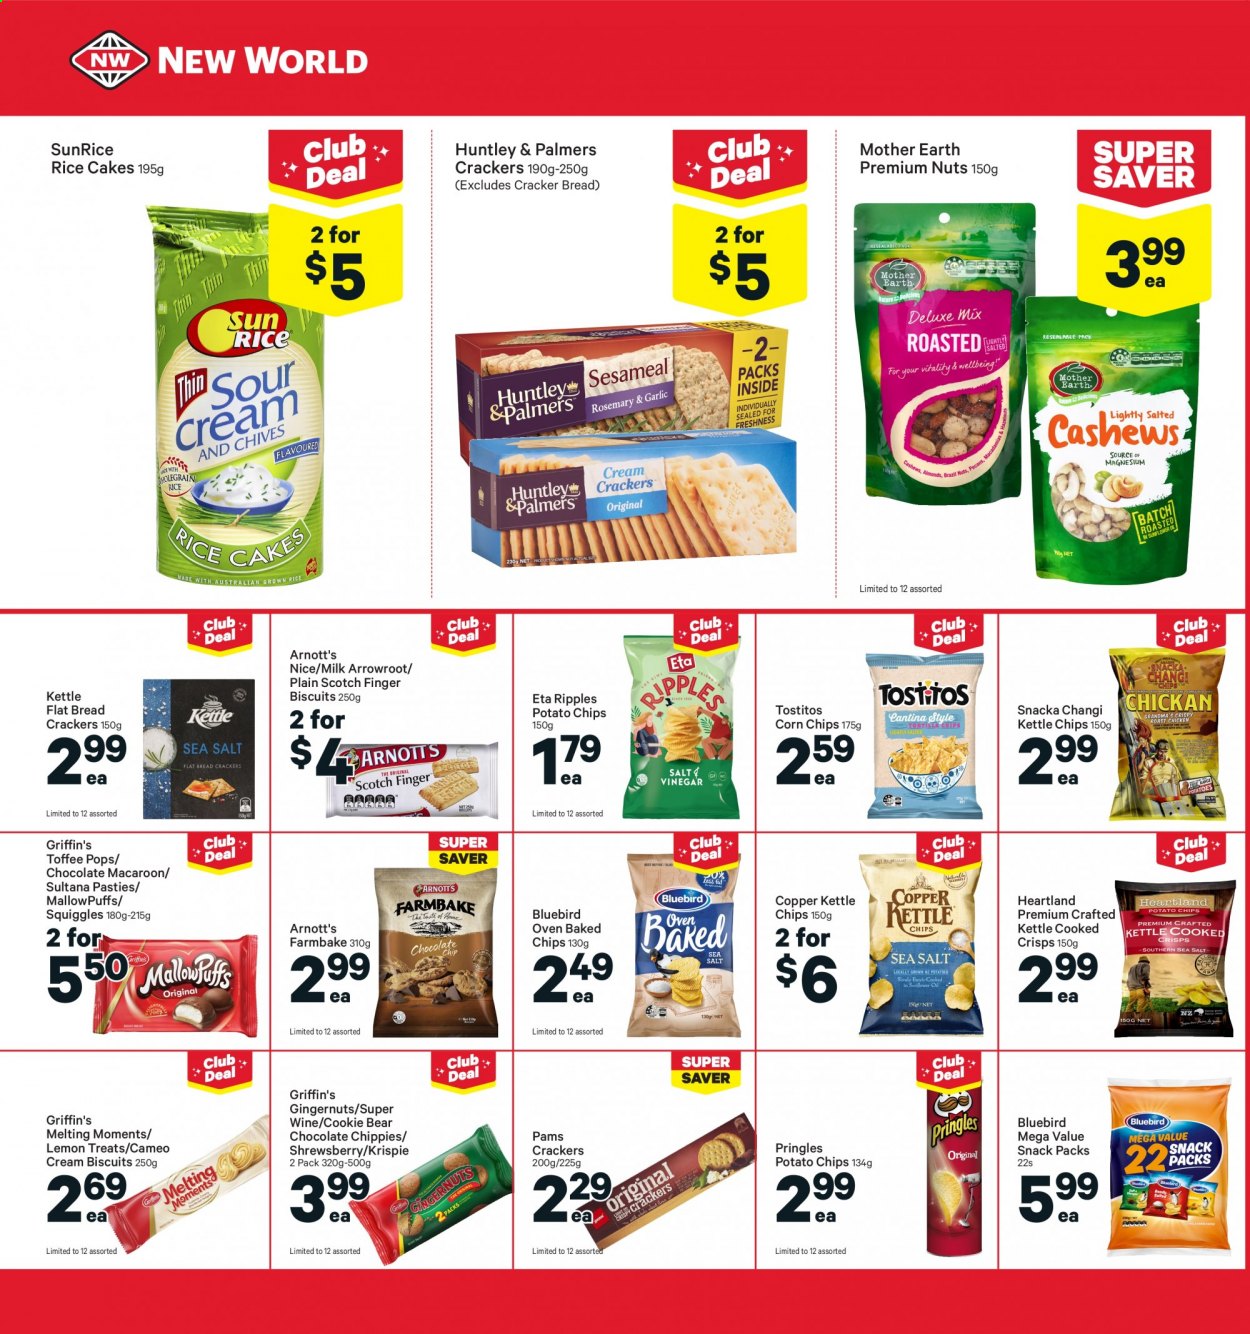 thumbnail - New World mailer - 28.06.2021 - 04.07.2021 - Sales products - bread, milk, chocolate, snack, toffee, crackers, biscuit, MallowPuffs, Griffin's, Mother Earth, potato chips, Pringles, chips, corn chips, Heartland, Bluebird, Copper Kettle, Tostitos, rice, wine. Page 18.